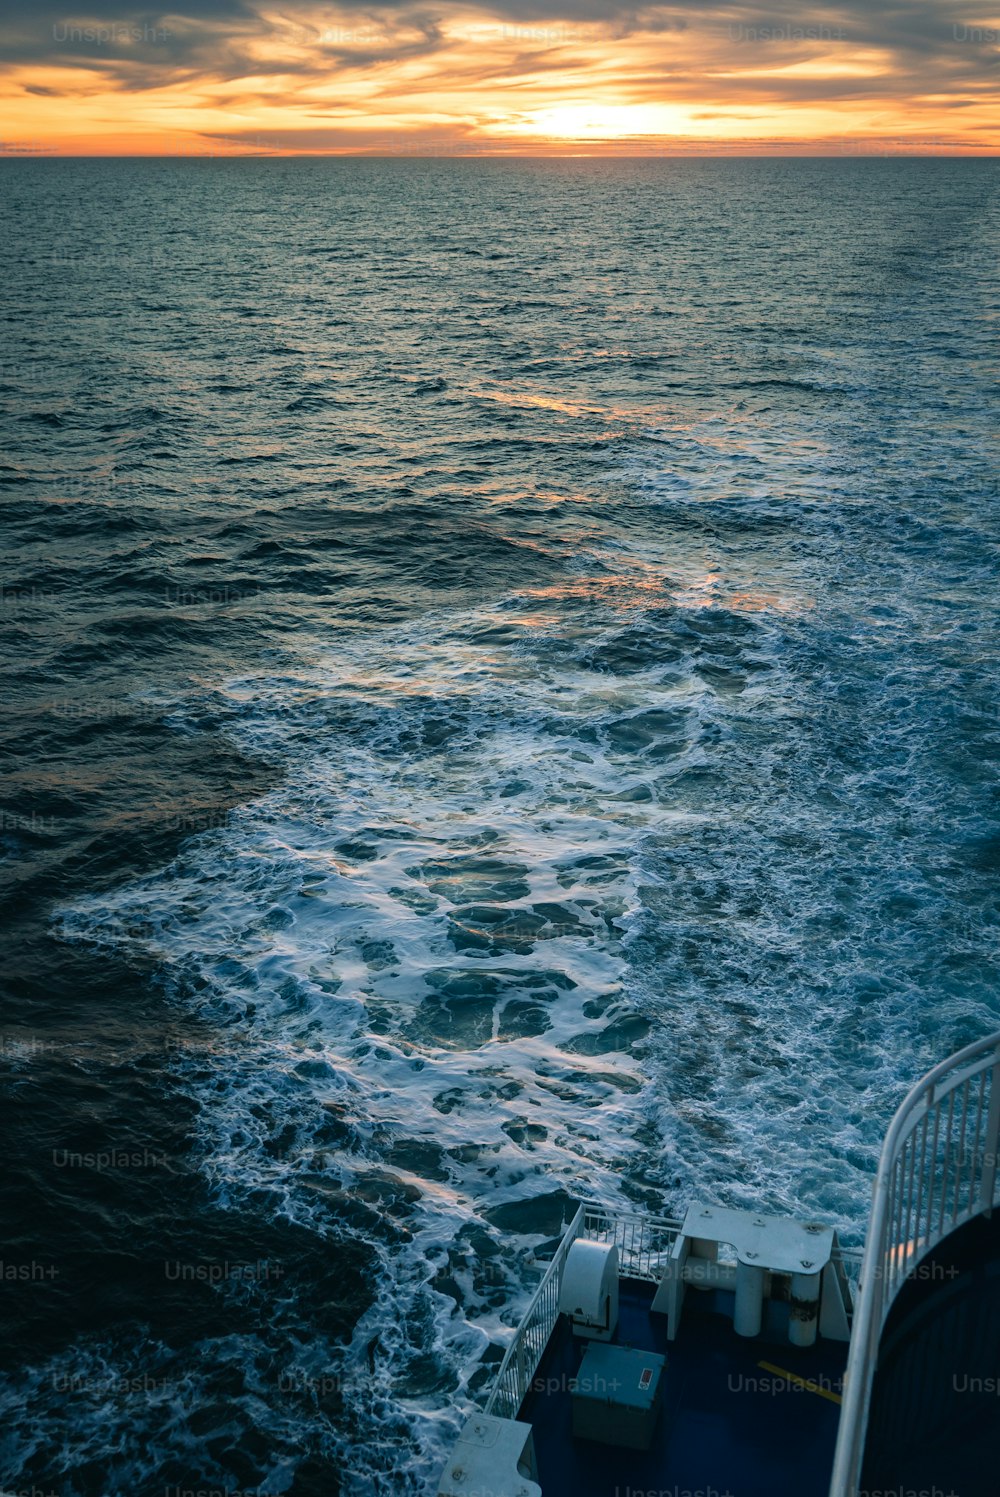 the sun is setting over the ocean as seen from a boat